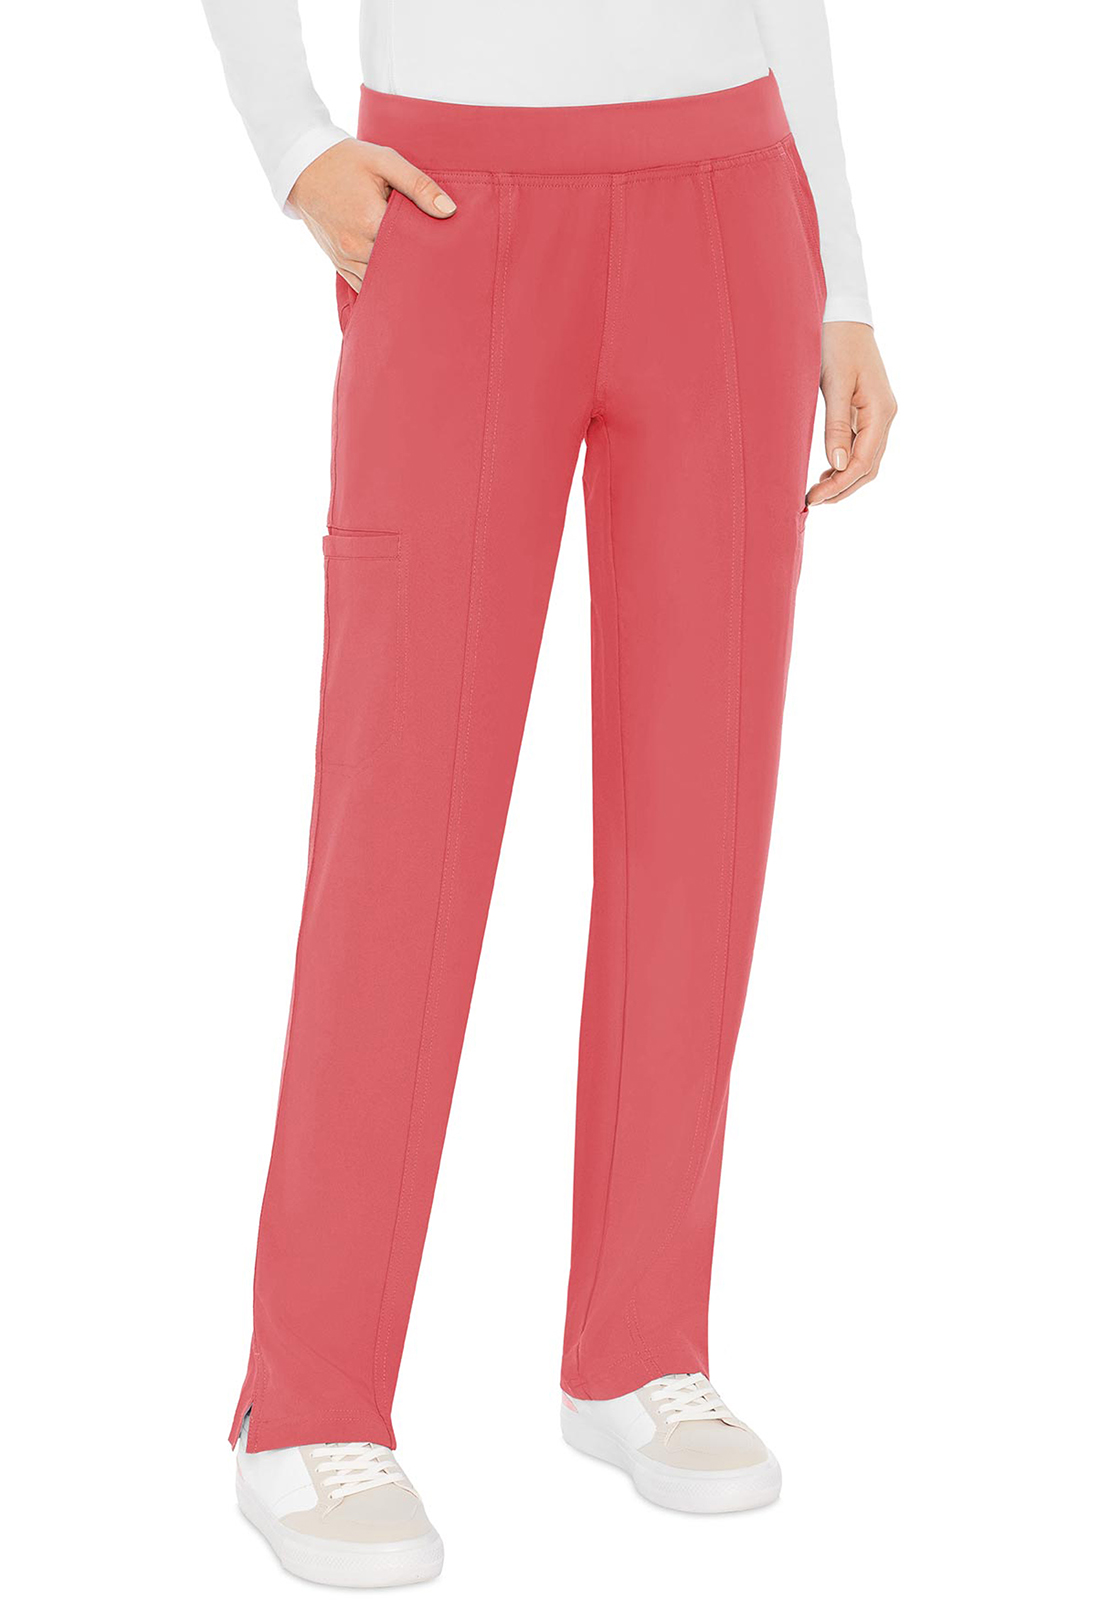 Med Couture MC Energy Yoga 2 Cargo Pocket Pant-Med Couture